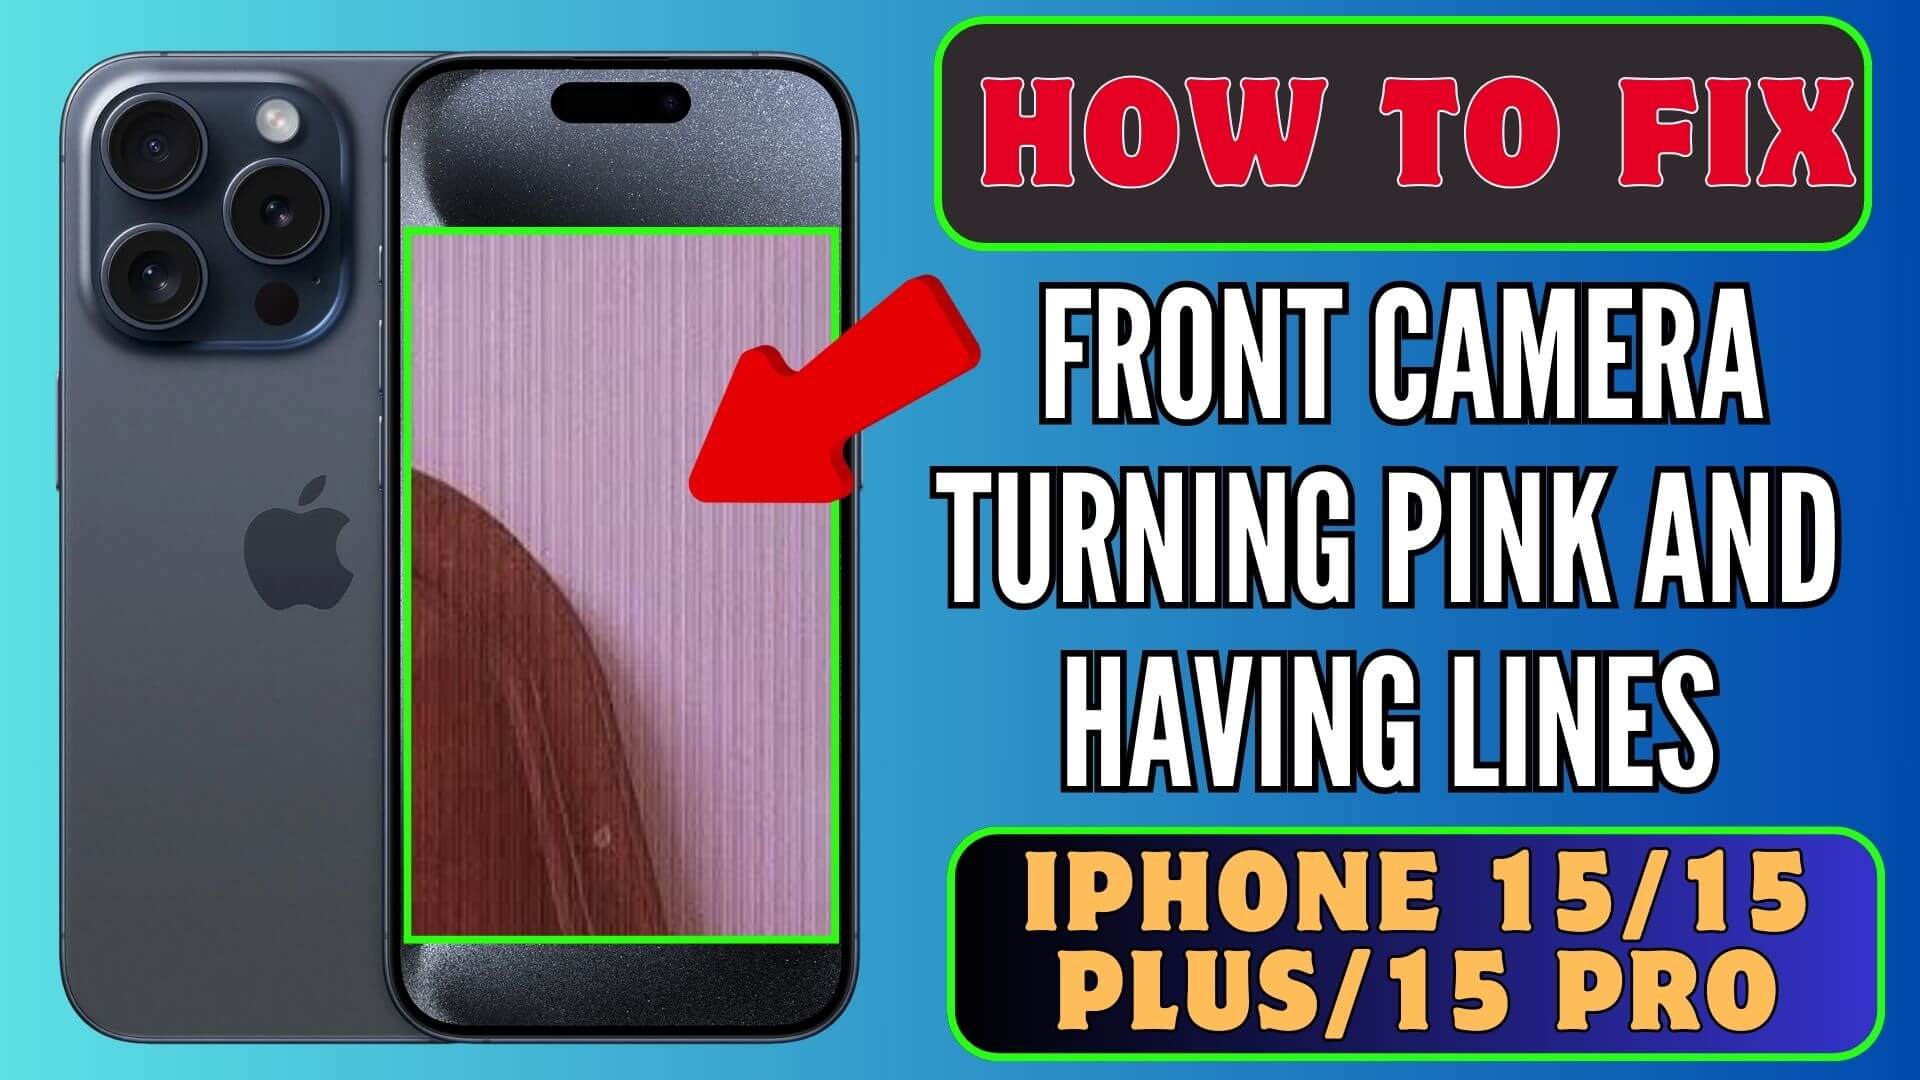 Fix Front Camera Turning Pink And Having Lines On iPhone 15/15 Plus/15 Pro